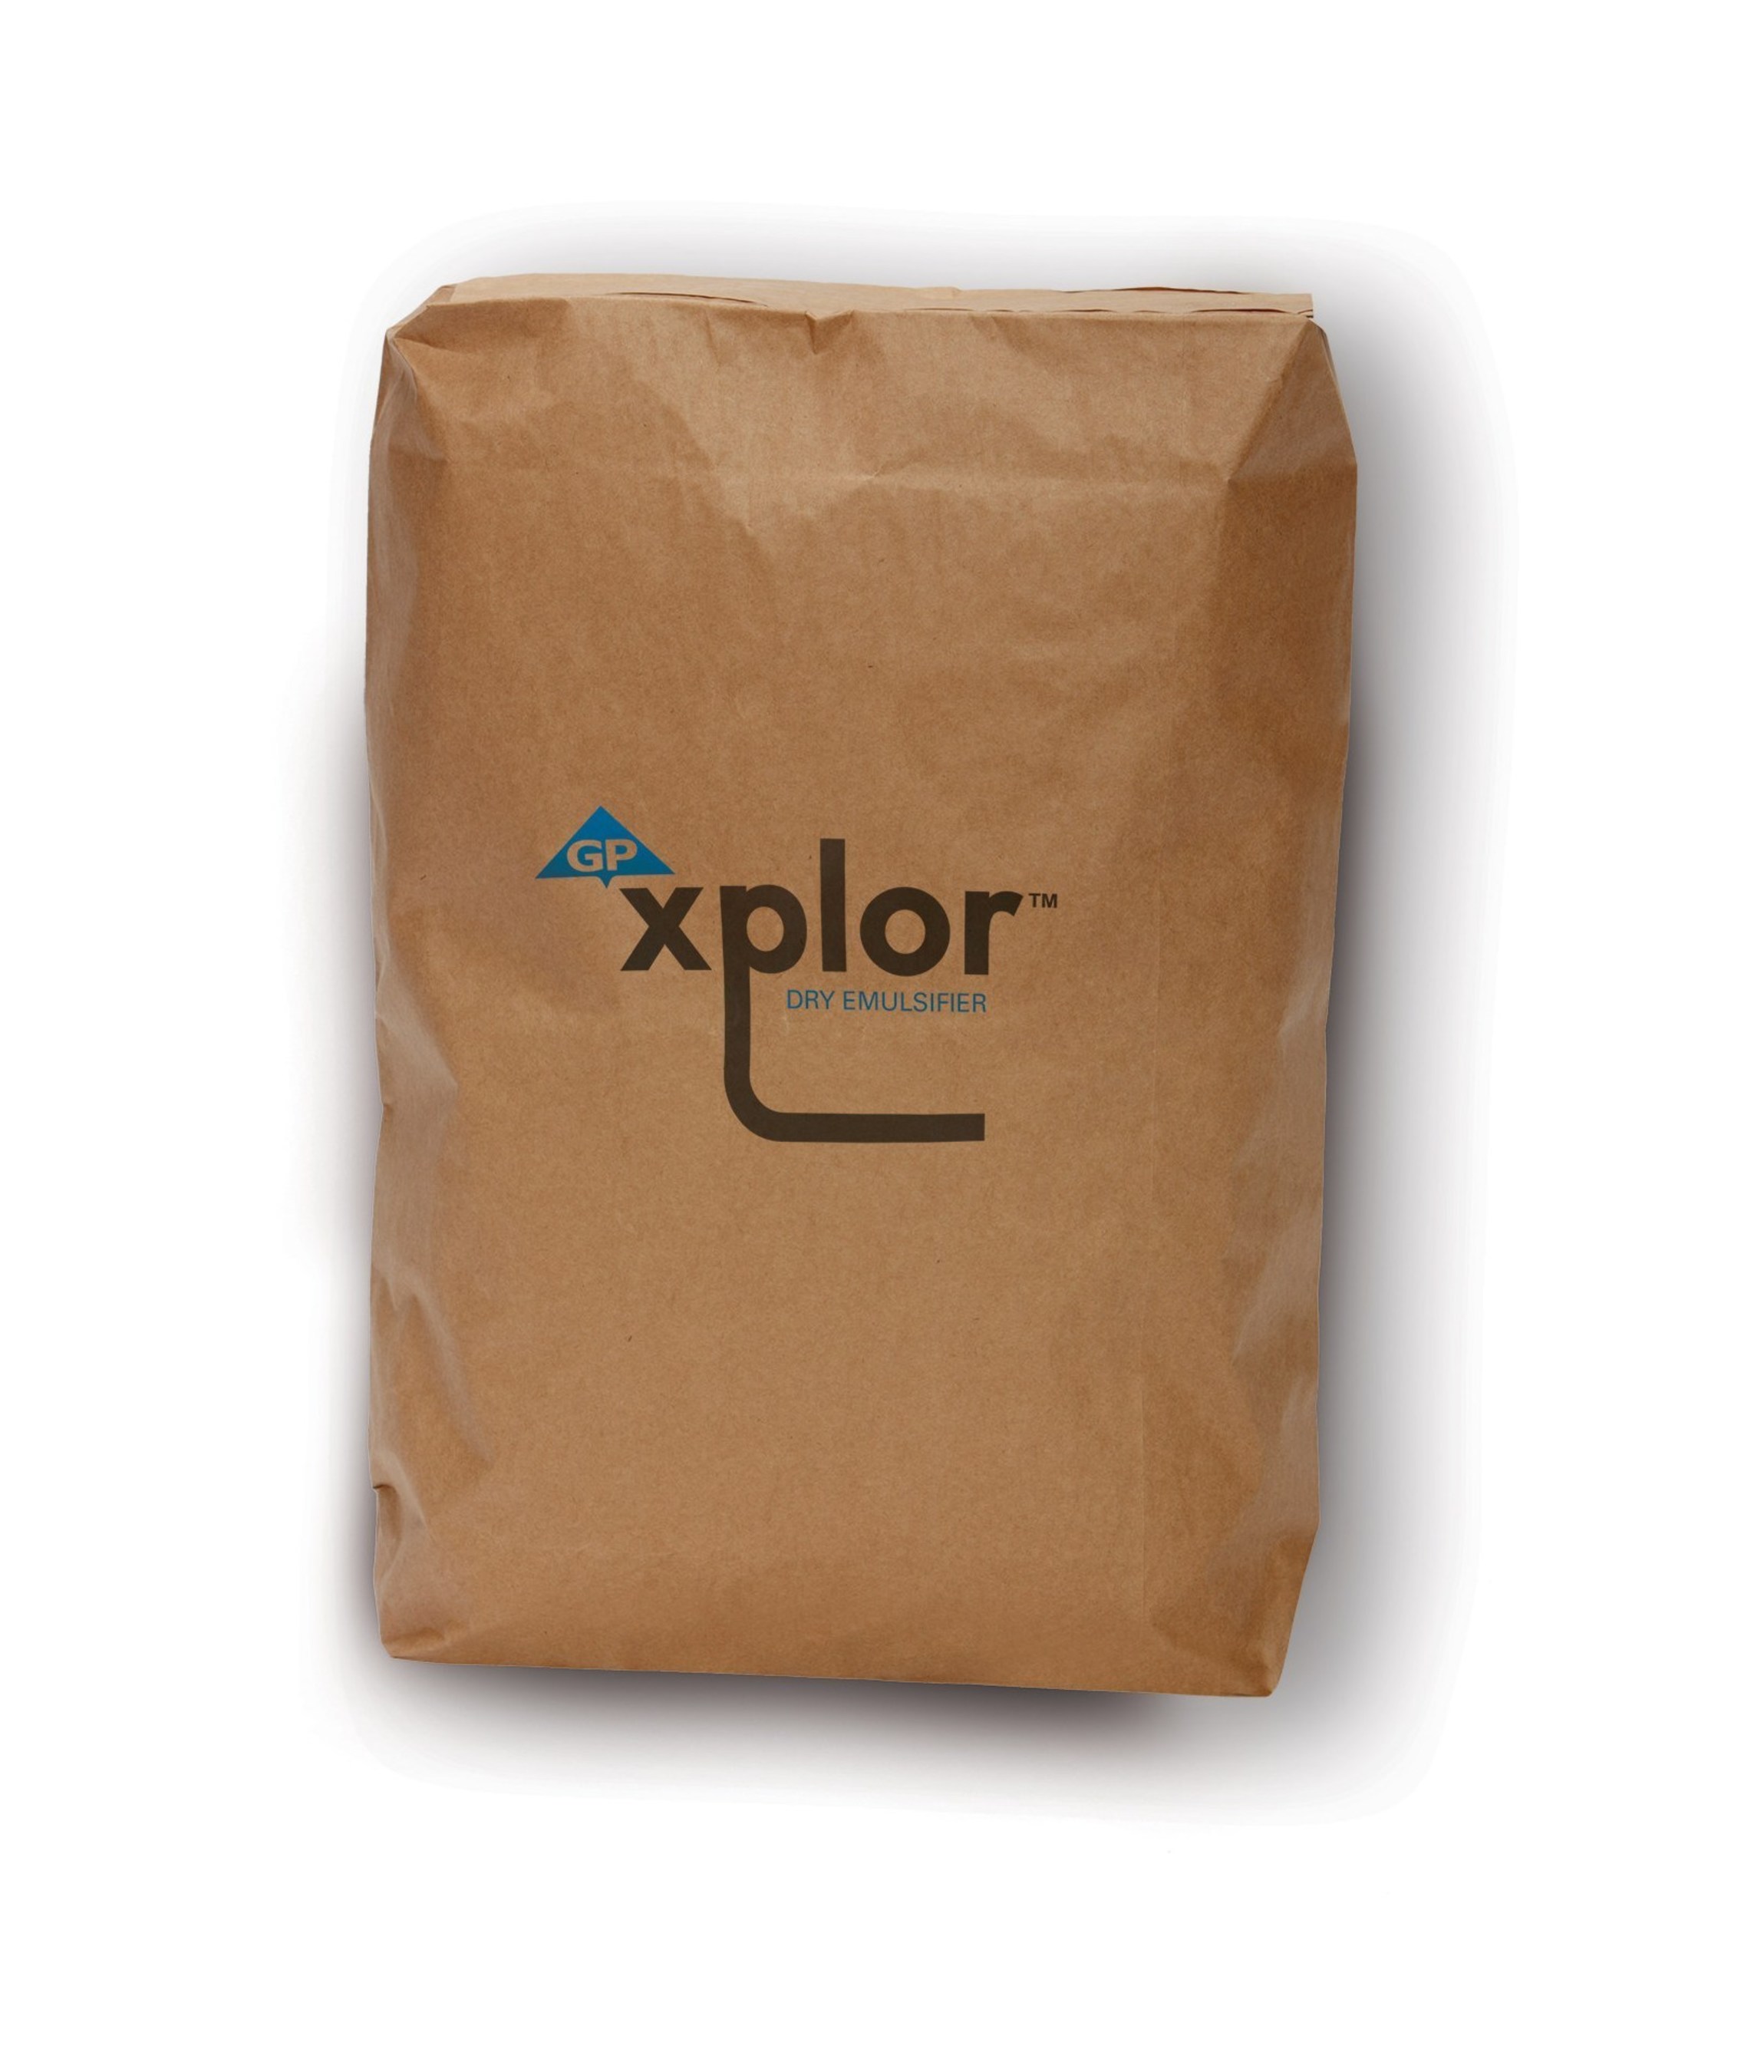 Georgia-Pacific Chemicals introduces the new XPLOR(TM) line of dry emulsifiers that combine performance with operational benefits in terms of efficiency and total use costs. Shipped in 25 pound bags, the product is also easier to pour than traditional liquids in barrels, allowing for more precise dosing.